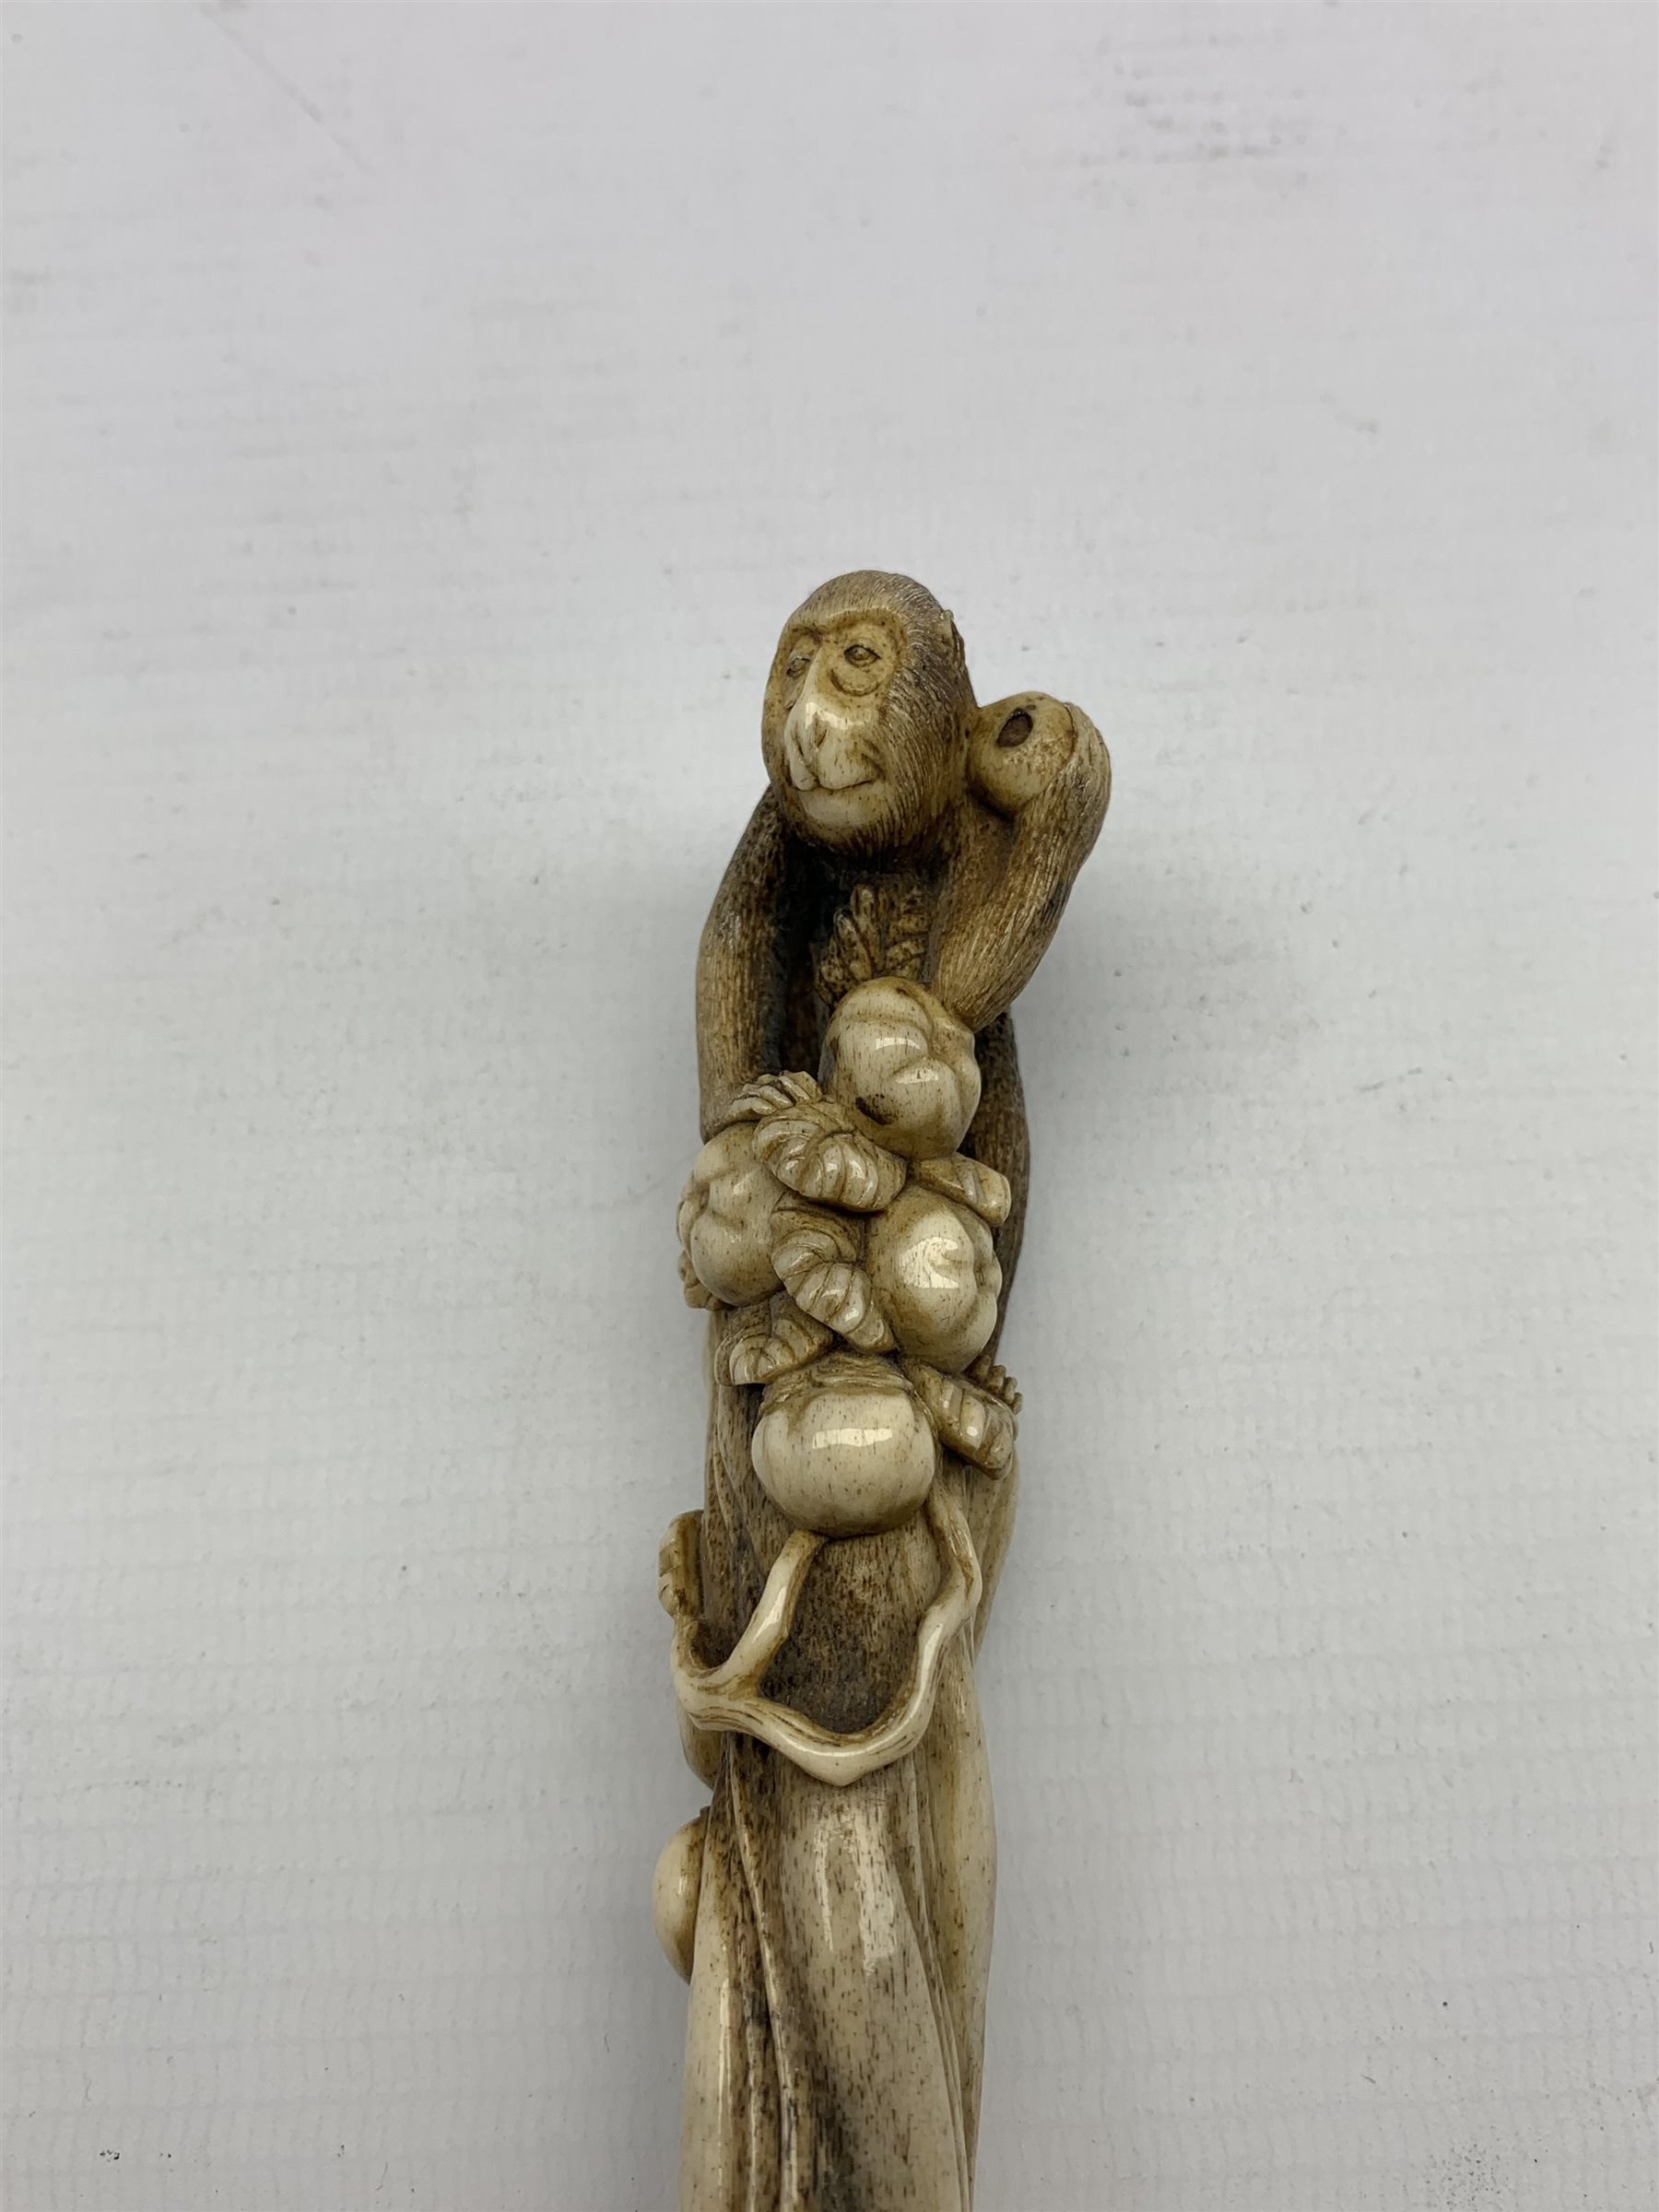 Edwardian silver and bone letter opener, the handle finely carved as a Monkey gathering fruit by Jam - Image 3 of 6